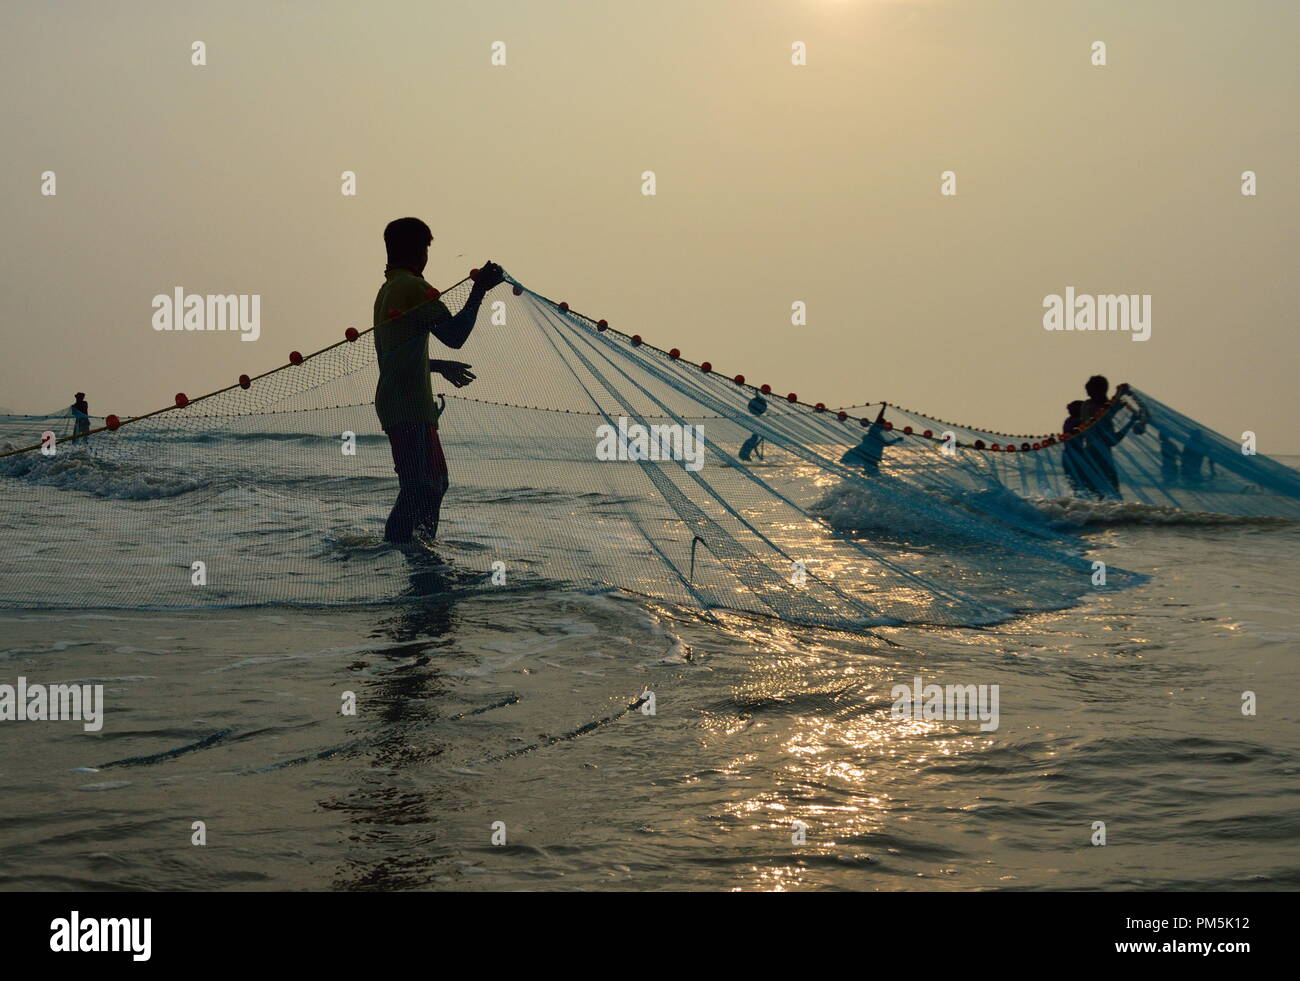 Daily life of the fishermen, they use fishing net to catch fishes